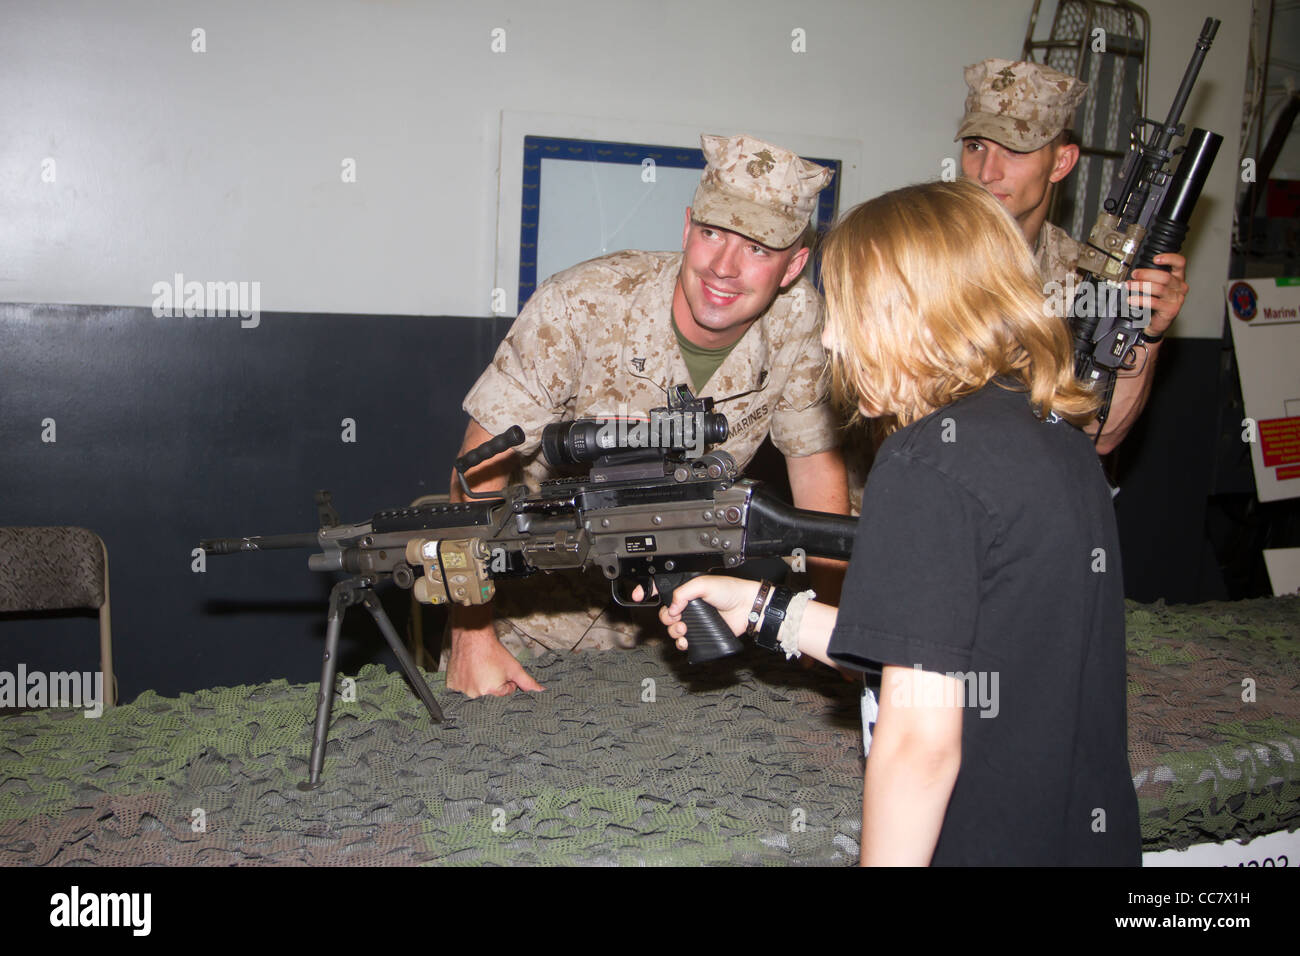 Marines demonstrate an assault rifle to a young boy on board the USS Iwo Jima during Fleet Week 2011 in New York City Stock Photo